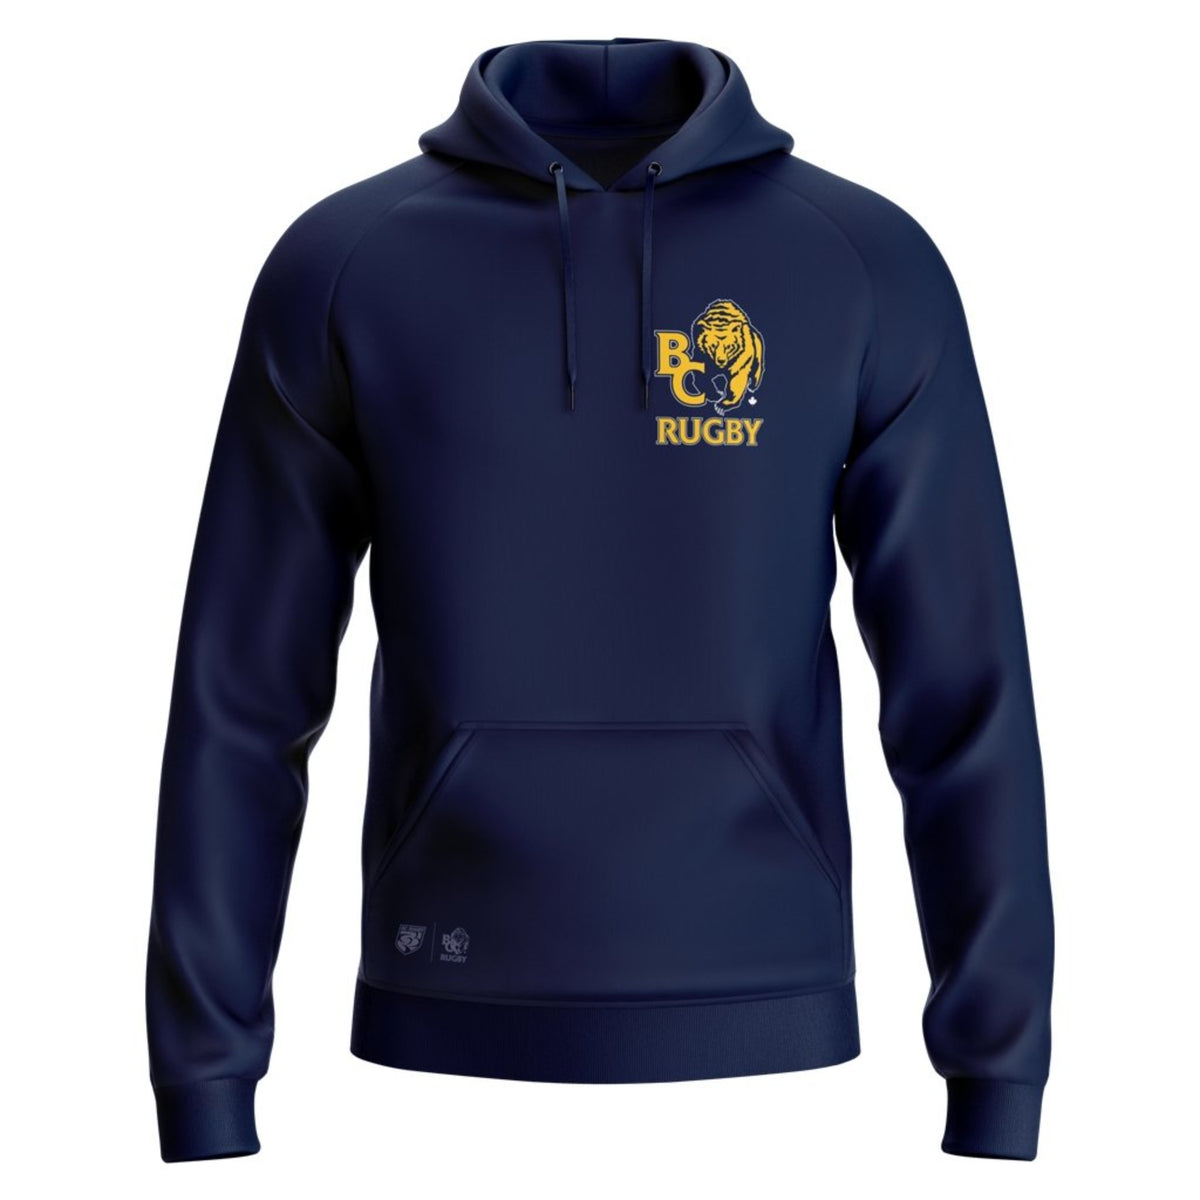 BC Rugby 2021 &quot;Small Logo Team&quot; Hoodie - Adult Unisex - www.therugbyshop.com www.therugbyshop.com ADULT UNISEX / NAVY / S XIX Brands HOODIES BC Rugby 2021 &quot;Small Logo Team&quot; Hoodie - Adult Unisex